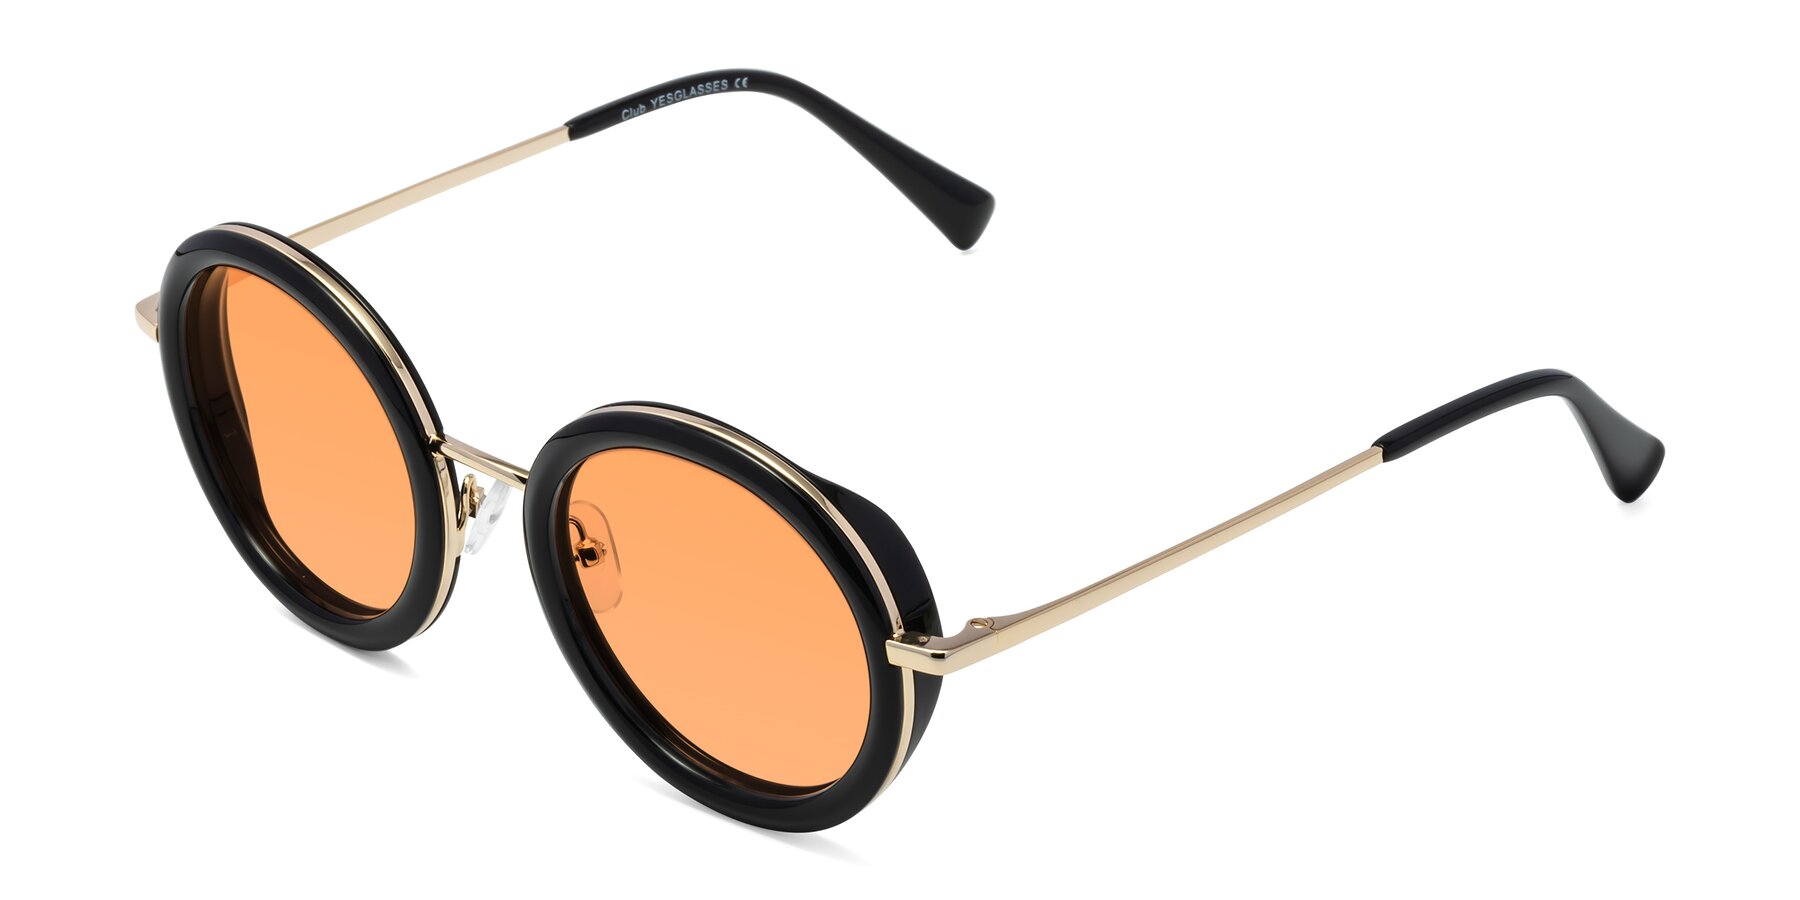 Angle of Club in Black-Gold with Medium Orange Tinted Lenses